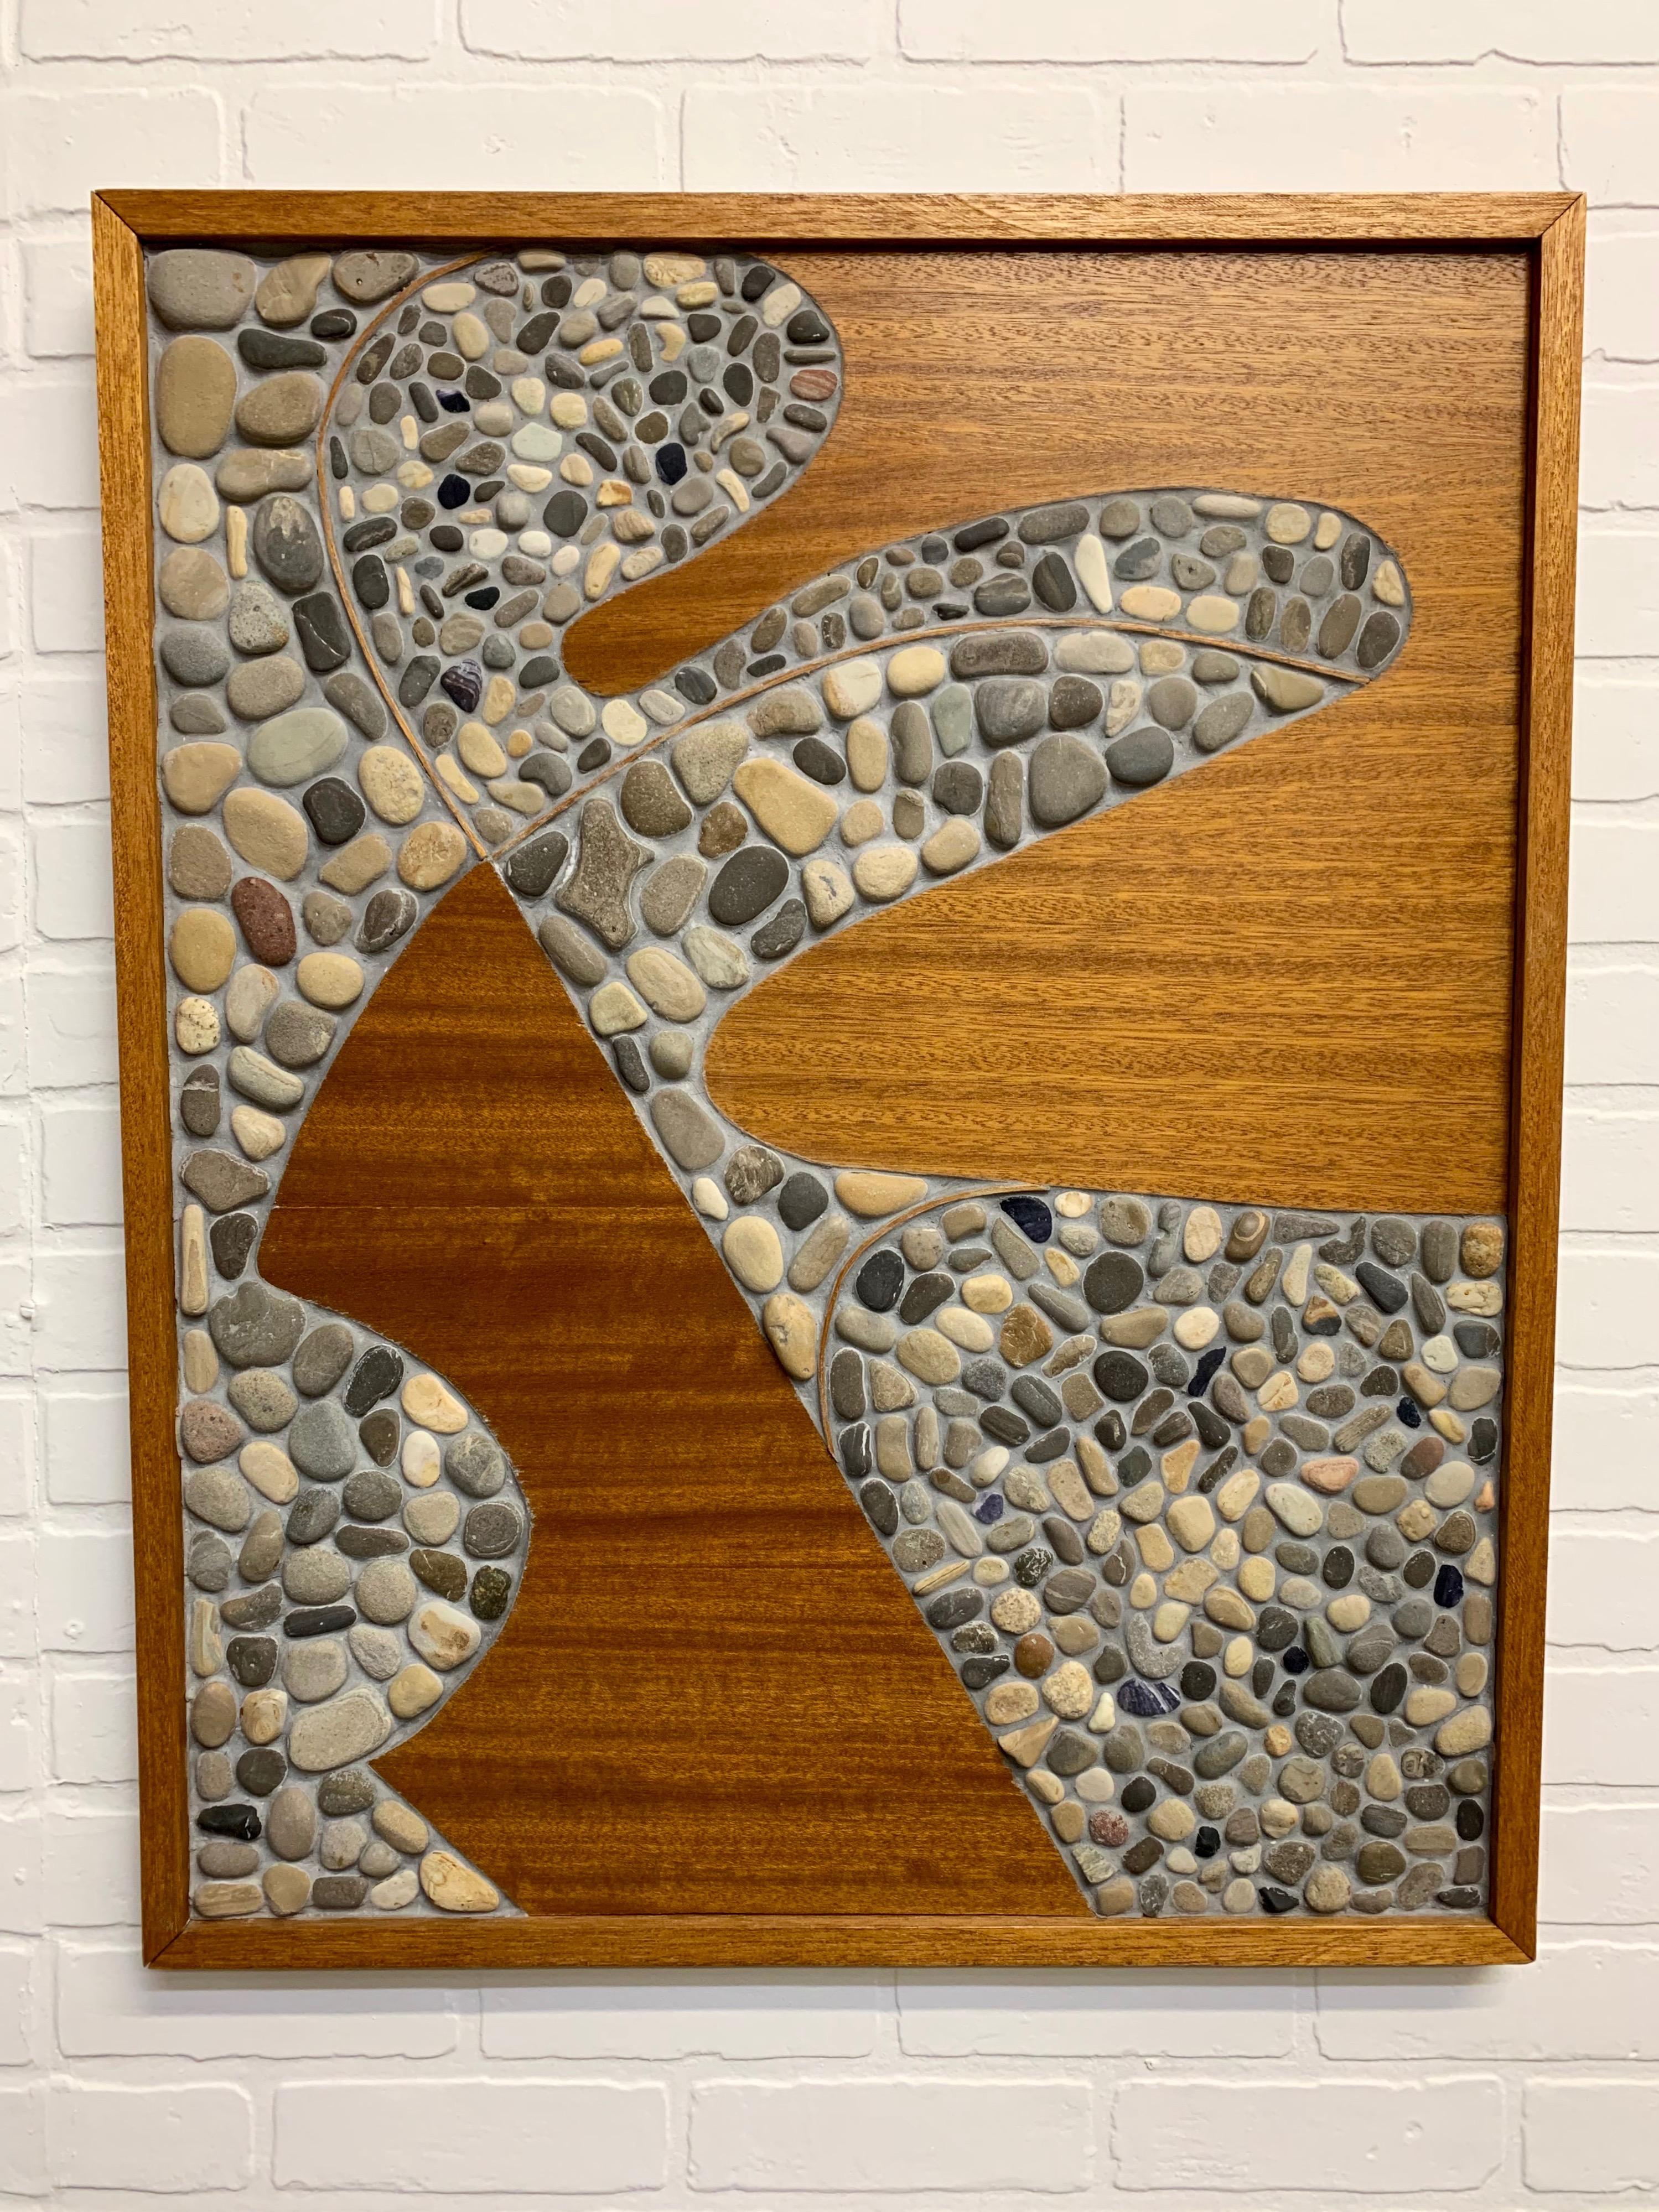 Abstract assemblage of stone mounted on board with wood surround.